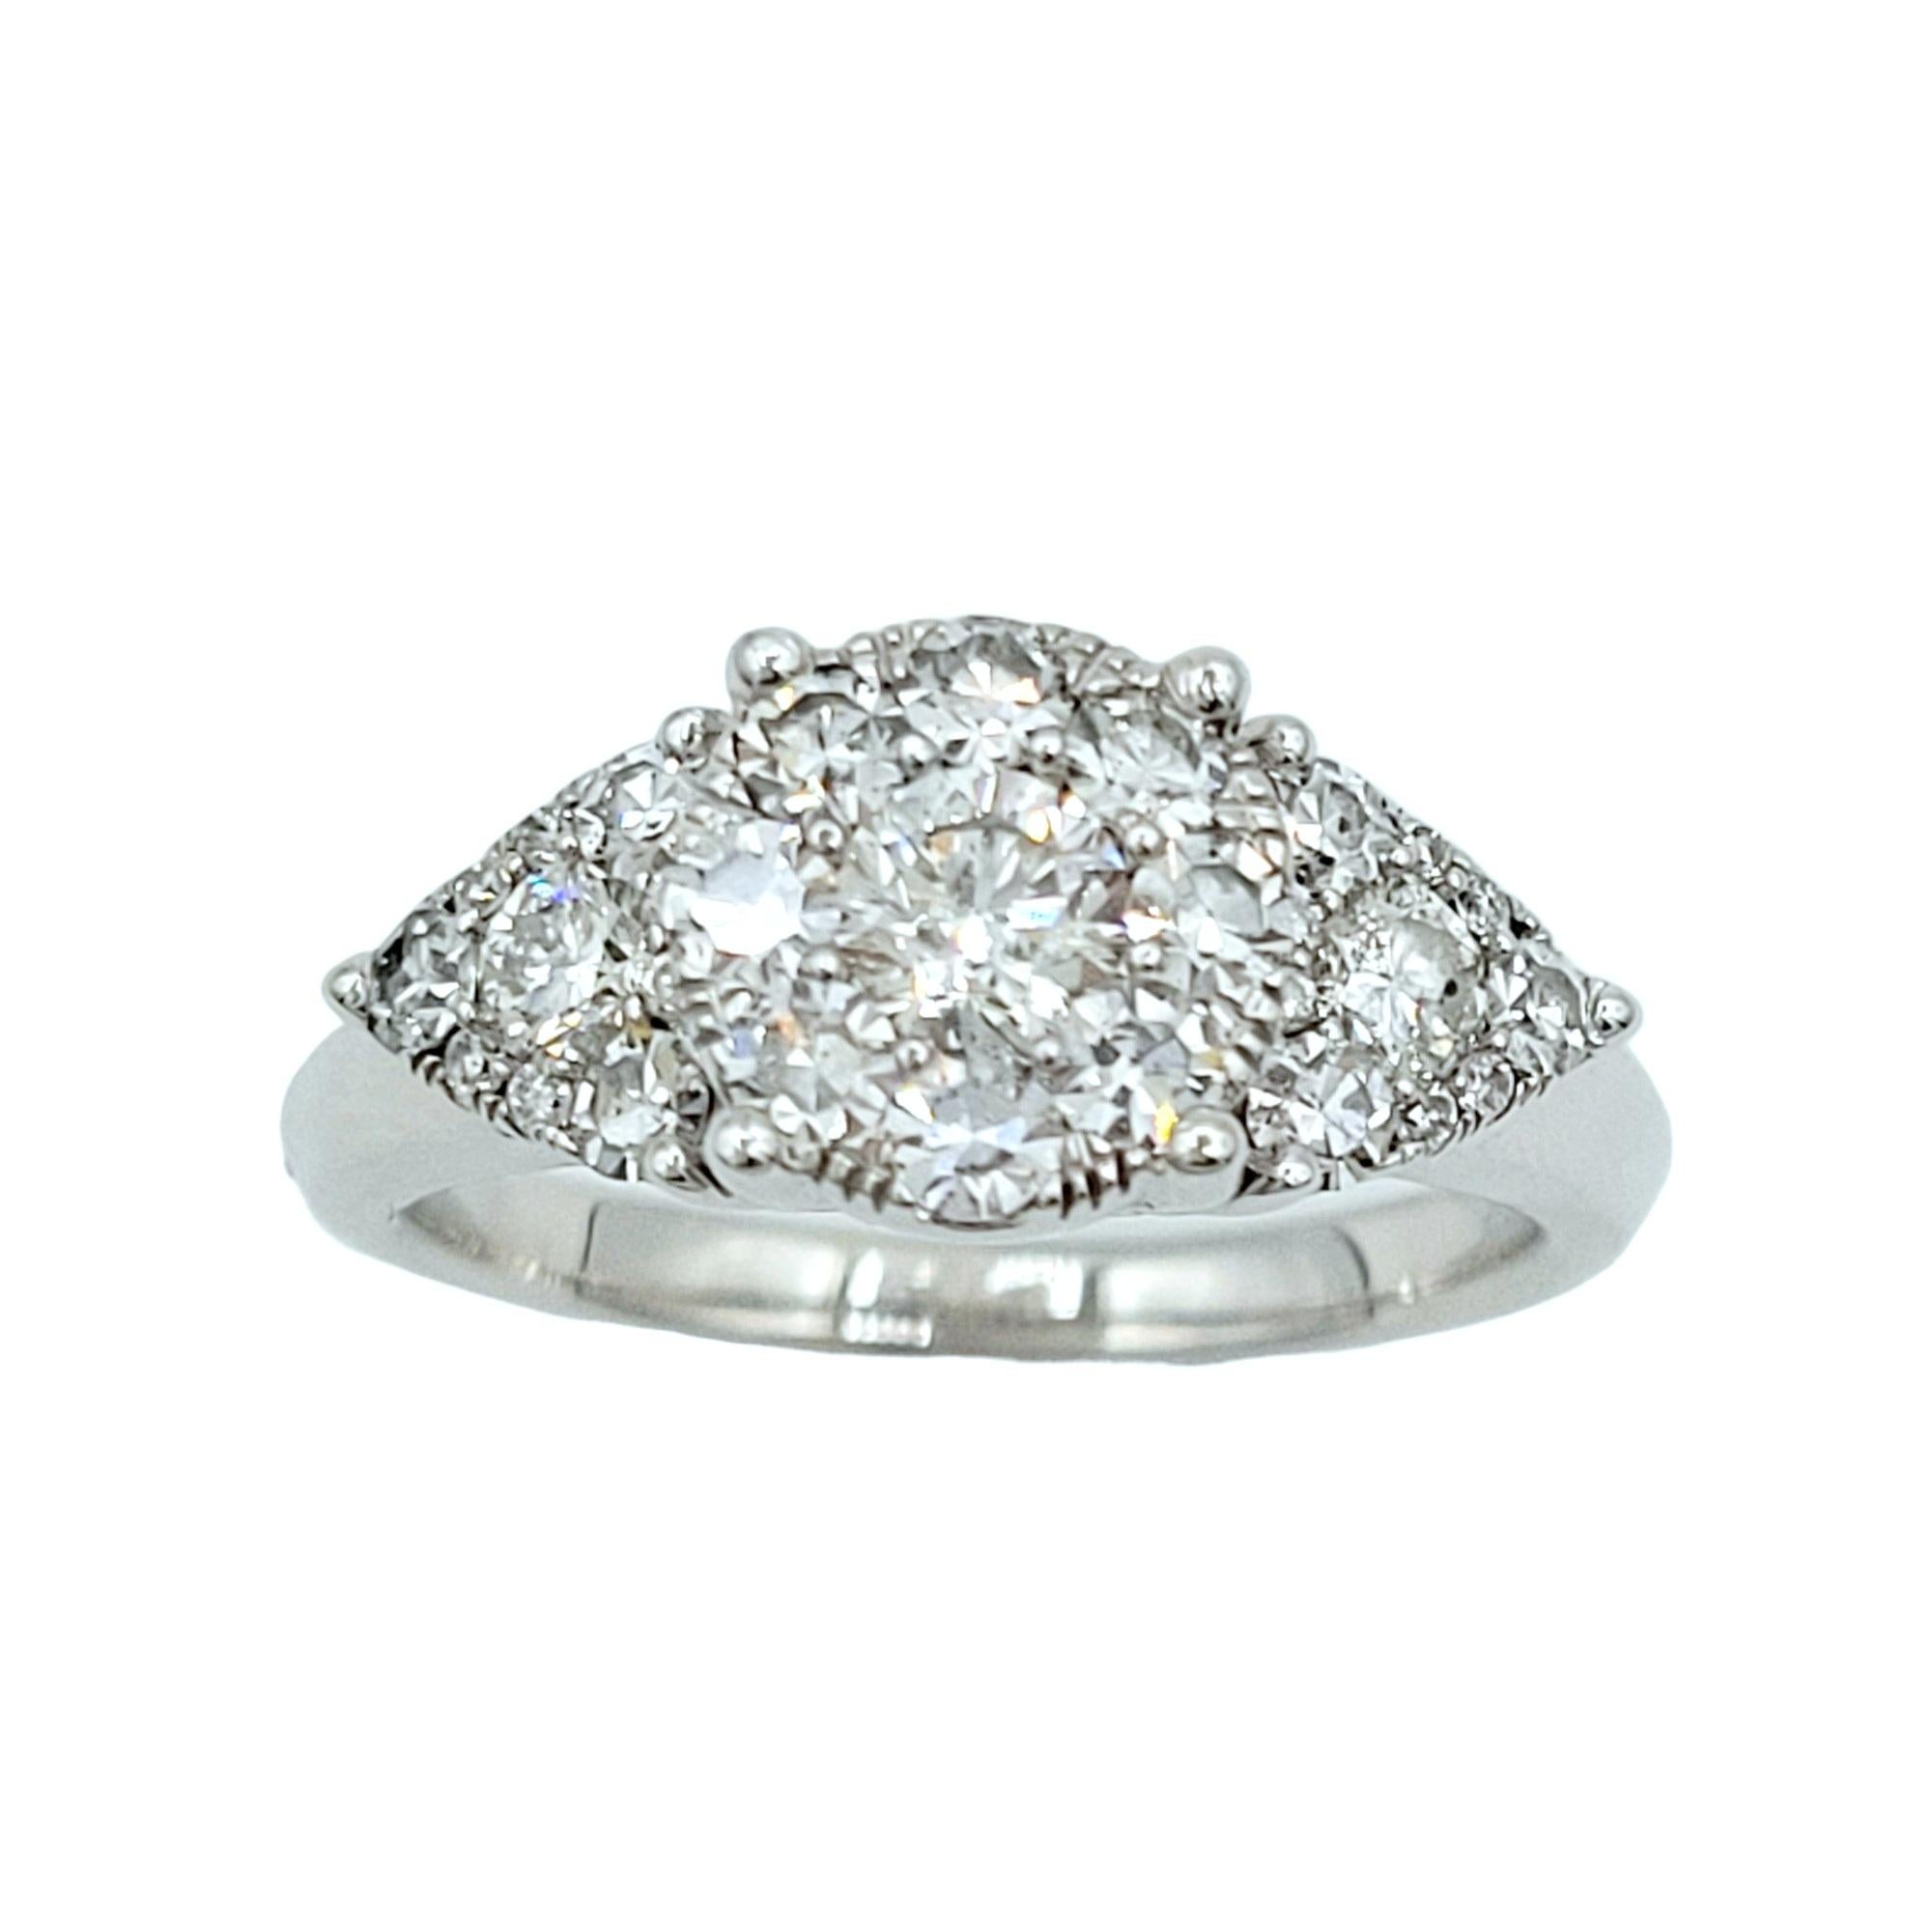 Ring Size: 6.75

This shimmering diamond ring, set in 14 karat white gold, features a captivating and clever design that creates the illusion of larger stones and magnificent sparkle. The centerpiece of the ring comprises a round diamond cluster